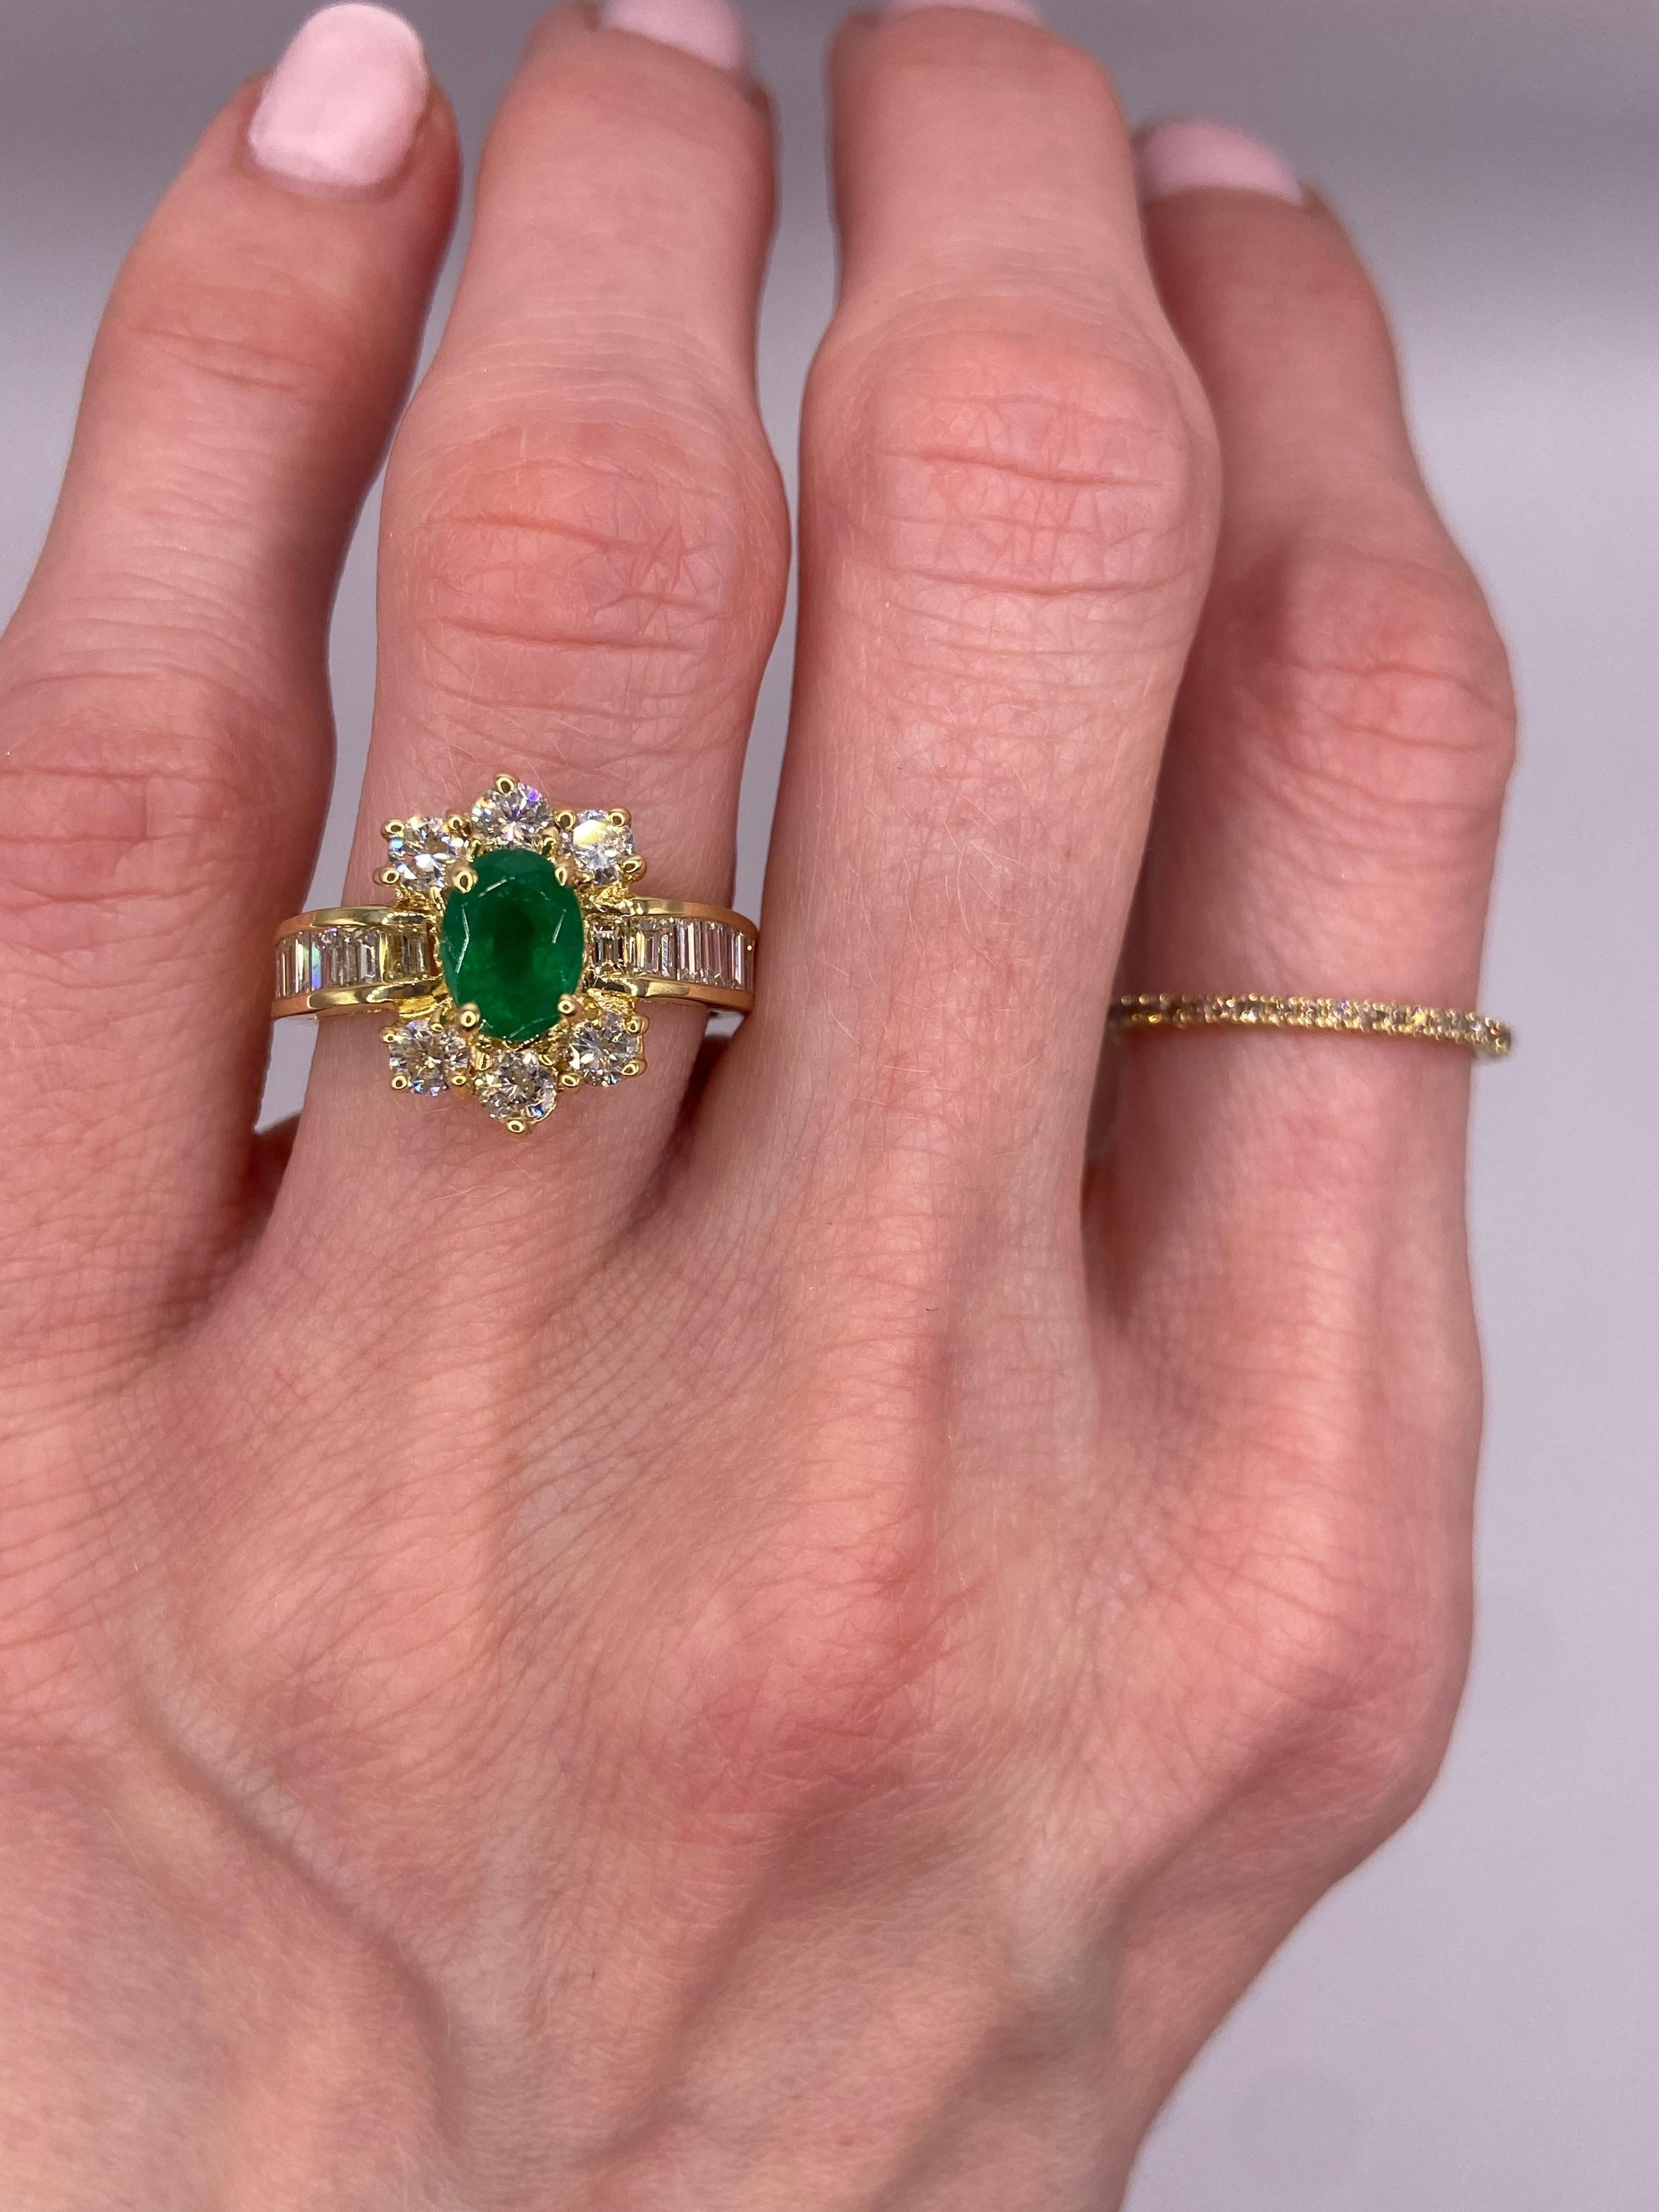 Metal: 18KT Yellow Gold
Finger Size: 6.0
(Ring is size 6.0, but is sizable upon request)

Number of Oval Emeralds: 1
Carat Weight: 1.00ctw
Stone Size: 7 x 5mm

Number of Baguette Diamonds: 14
Carat Weight: 0.90ctw

Number of Round Diamonds: 6
Carat